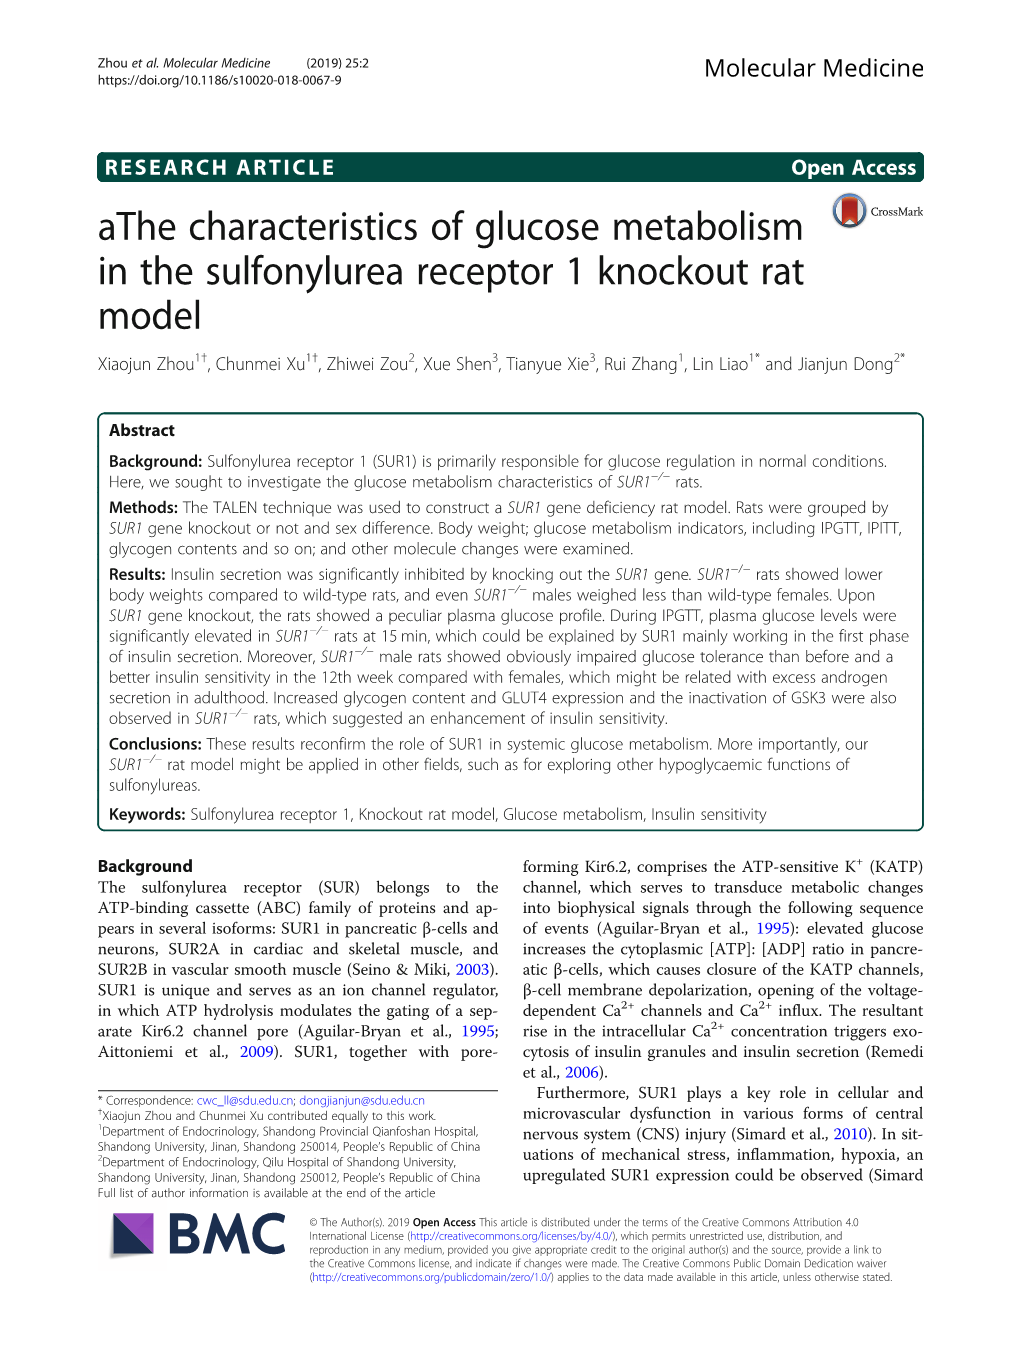 Athe Characteristics of Glucose Metabolism in the Sulfonylurea